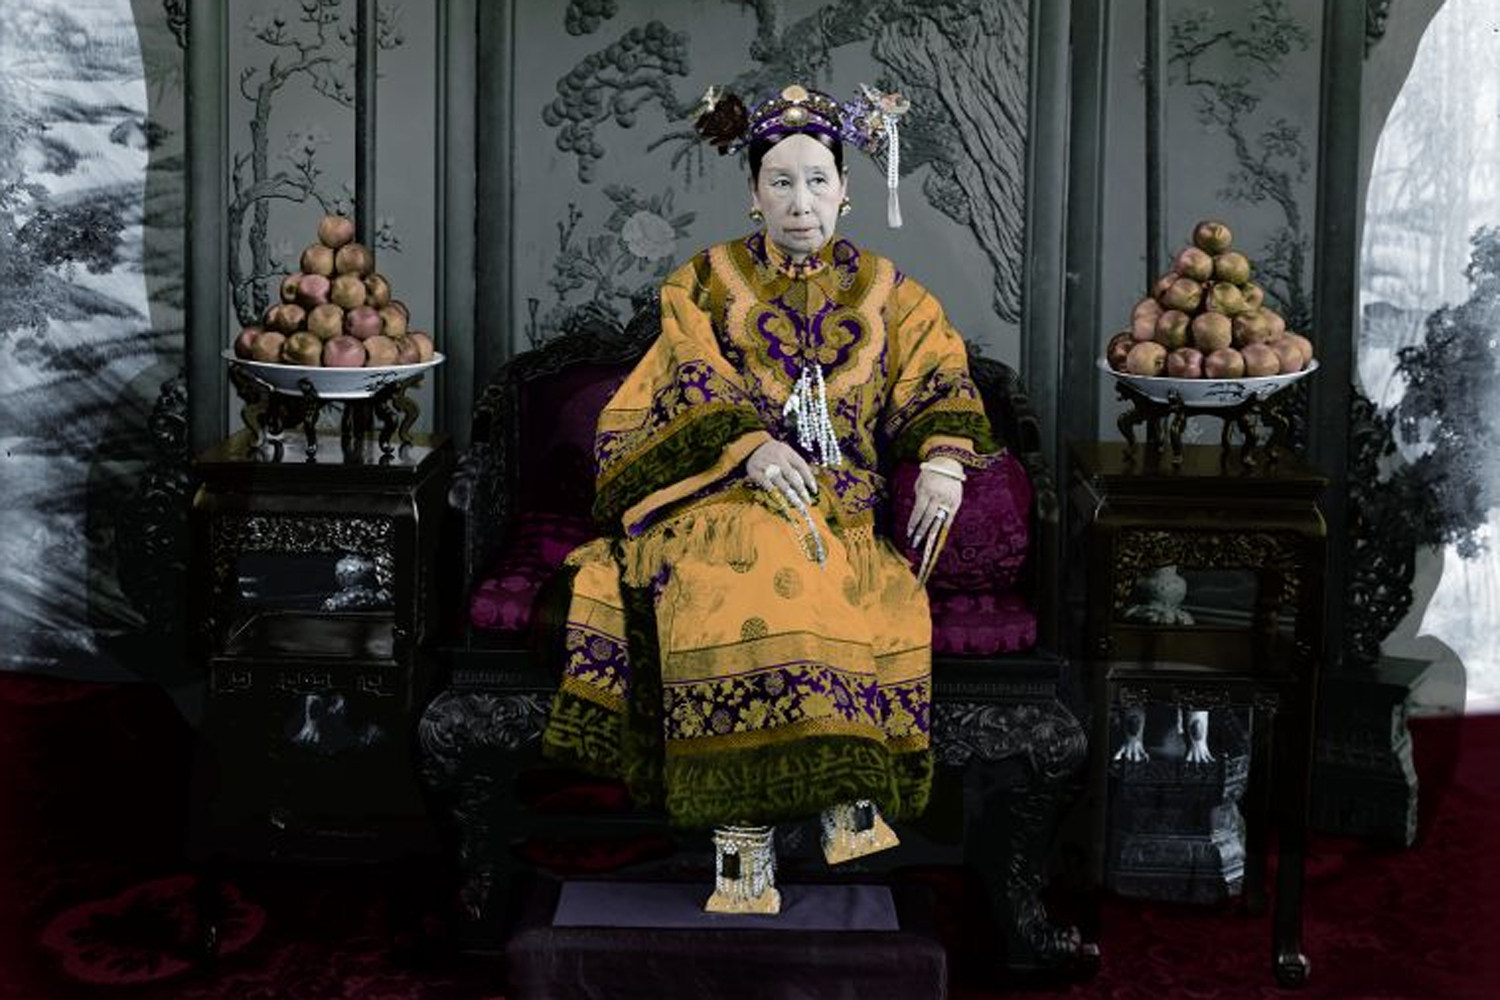 The first nationwide elections in modern China were held in 1909, instigated by the Empress Dowager Cixi, three years after she had scuppered similar reforms launched by her nephew the Guangxu Emperor.